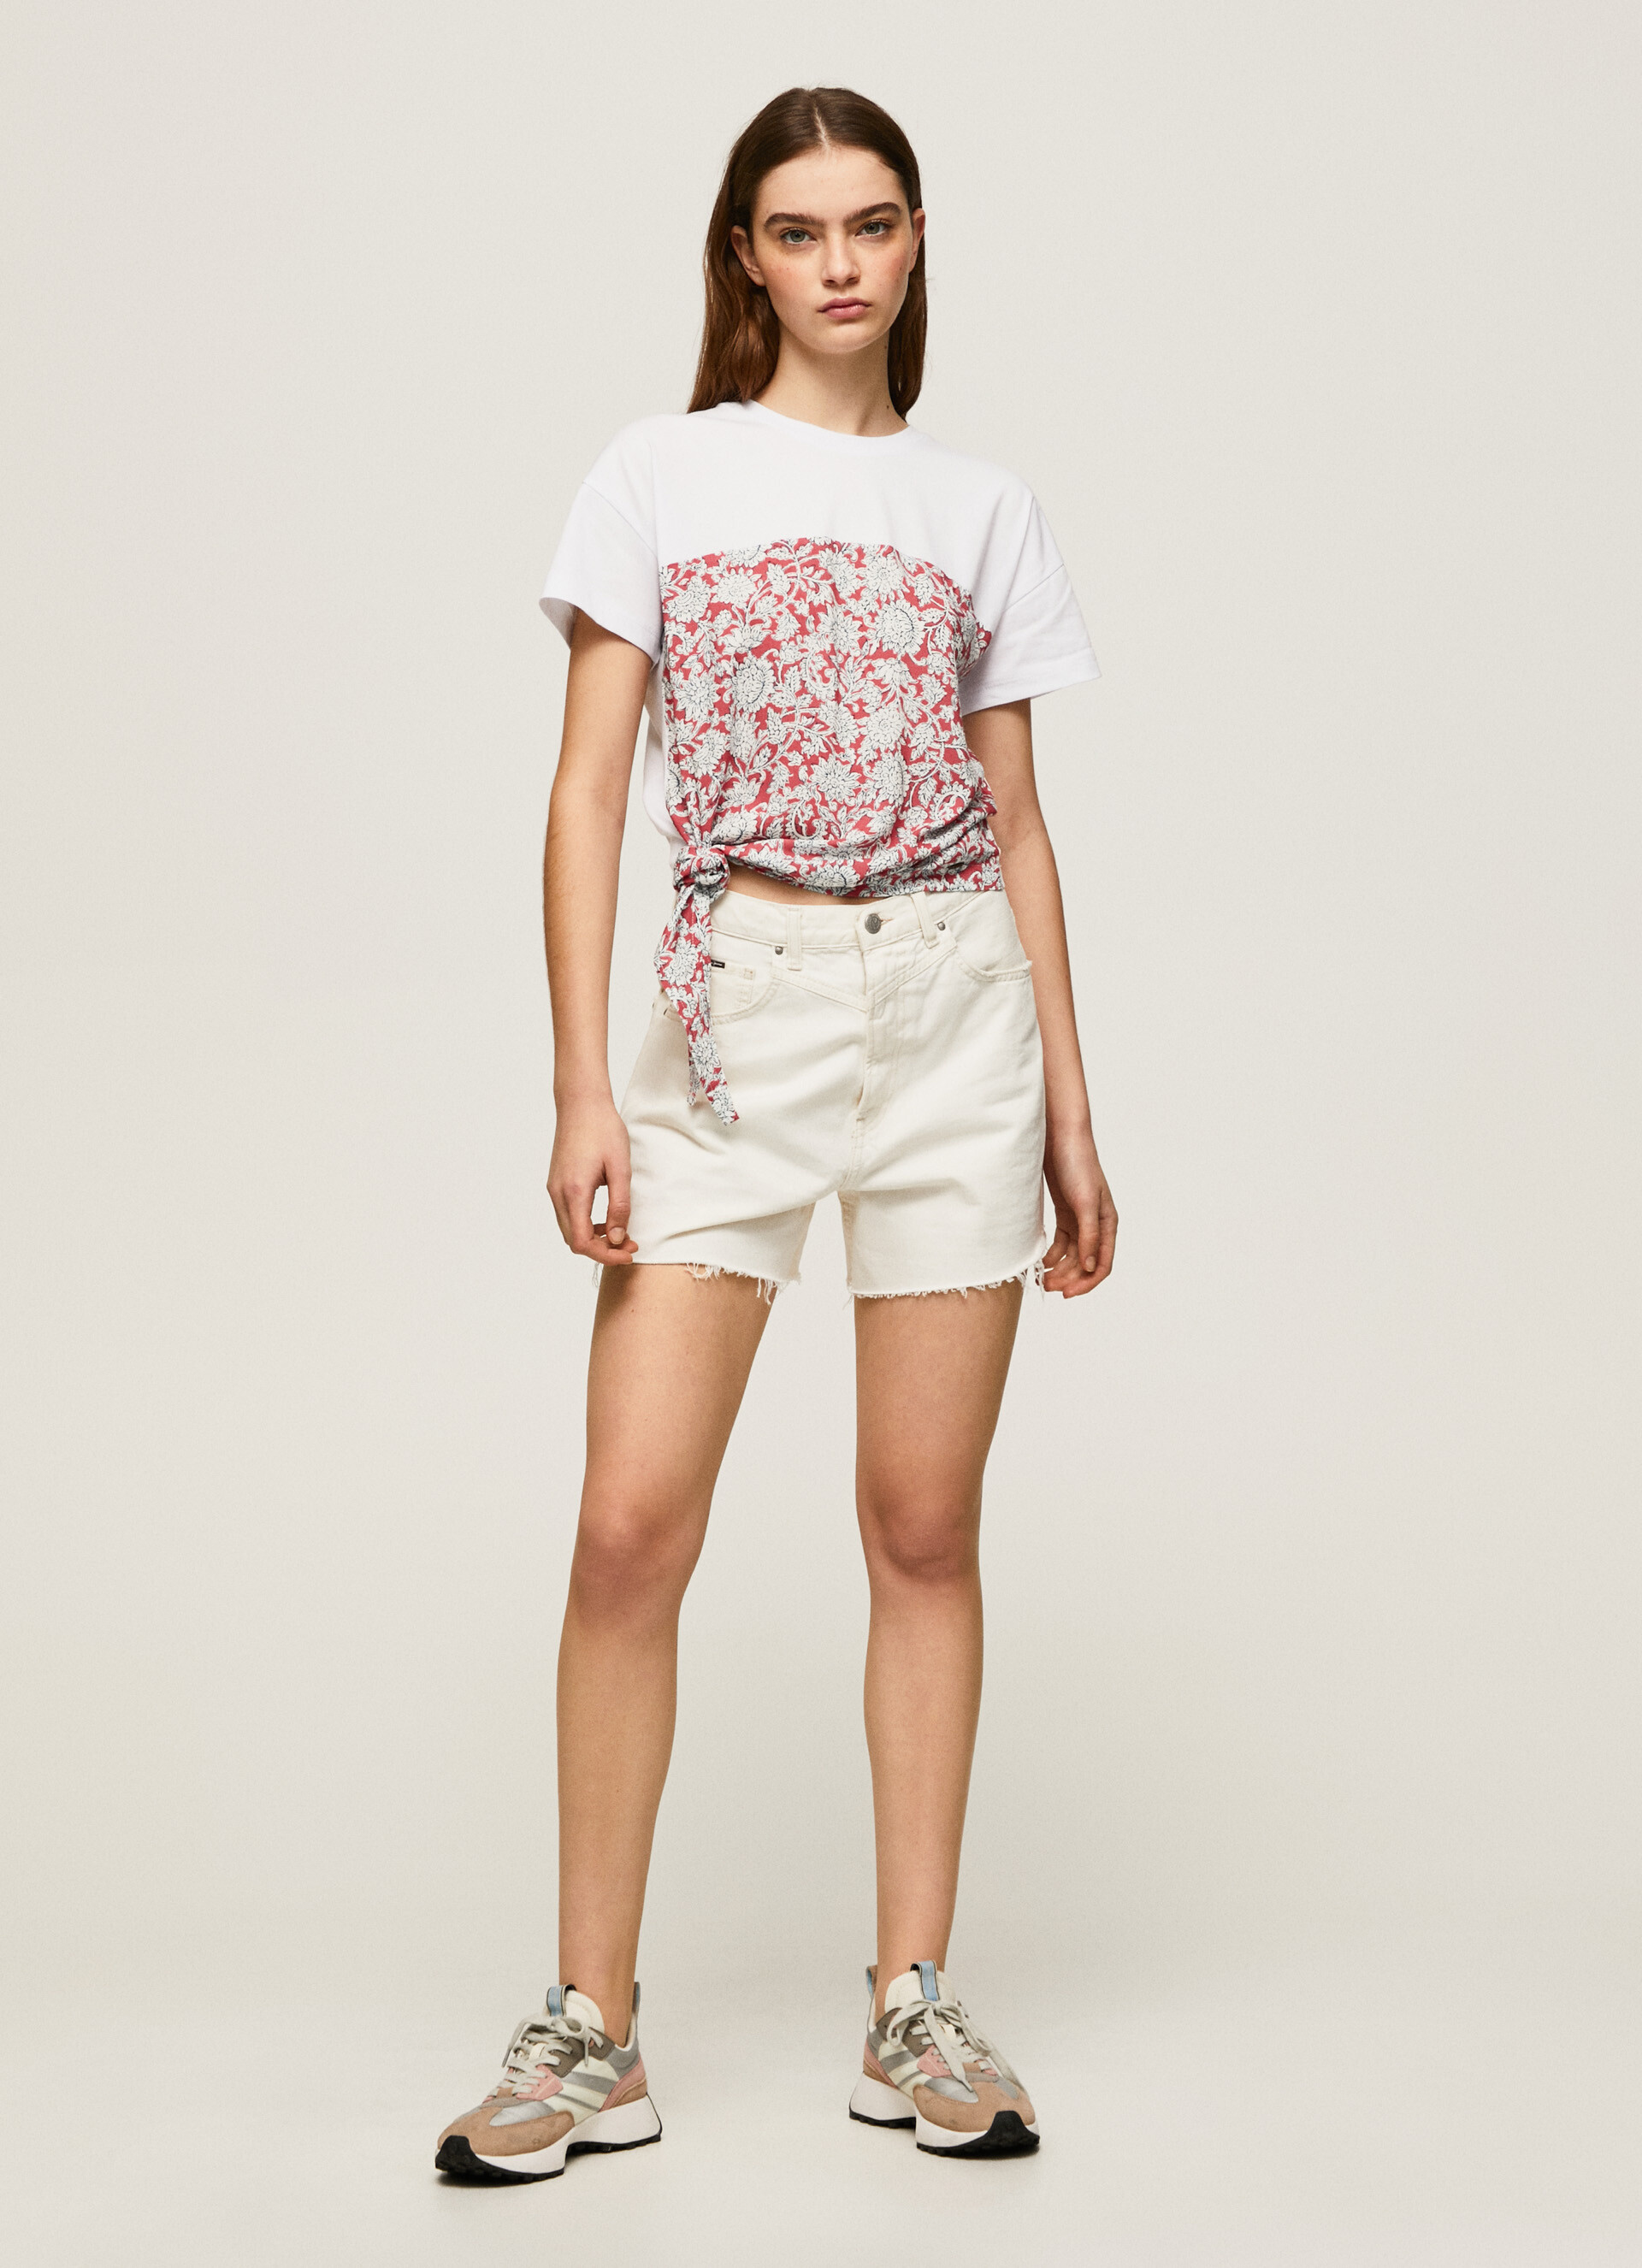 Pepe Jeans - Patterned cotton T-shirt, Red, large image number 5